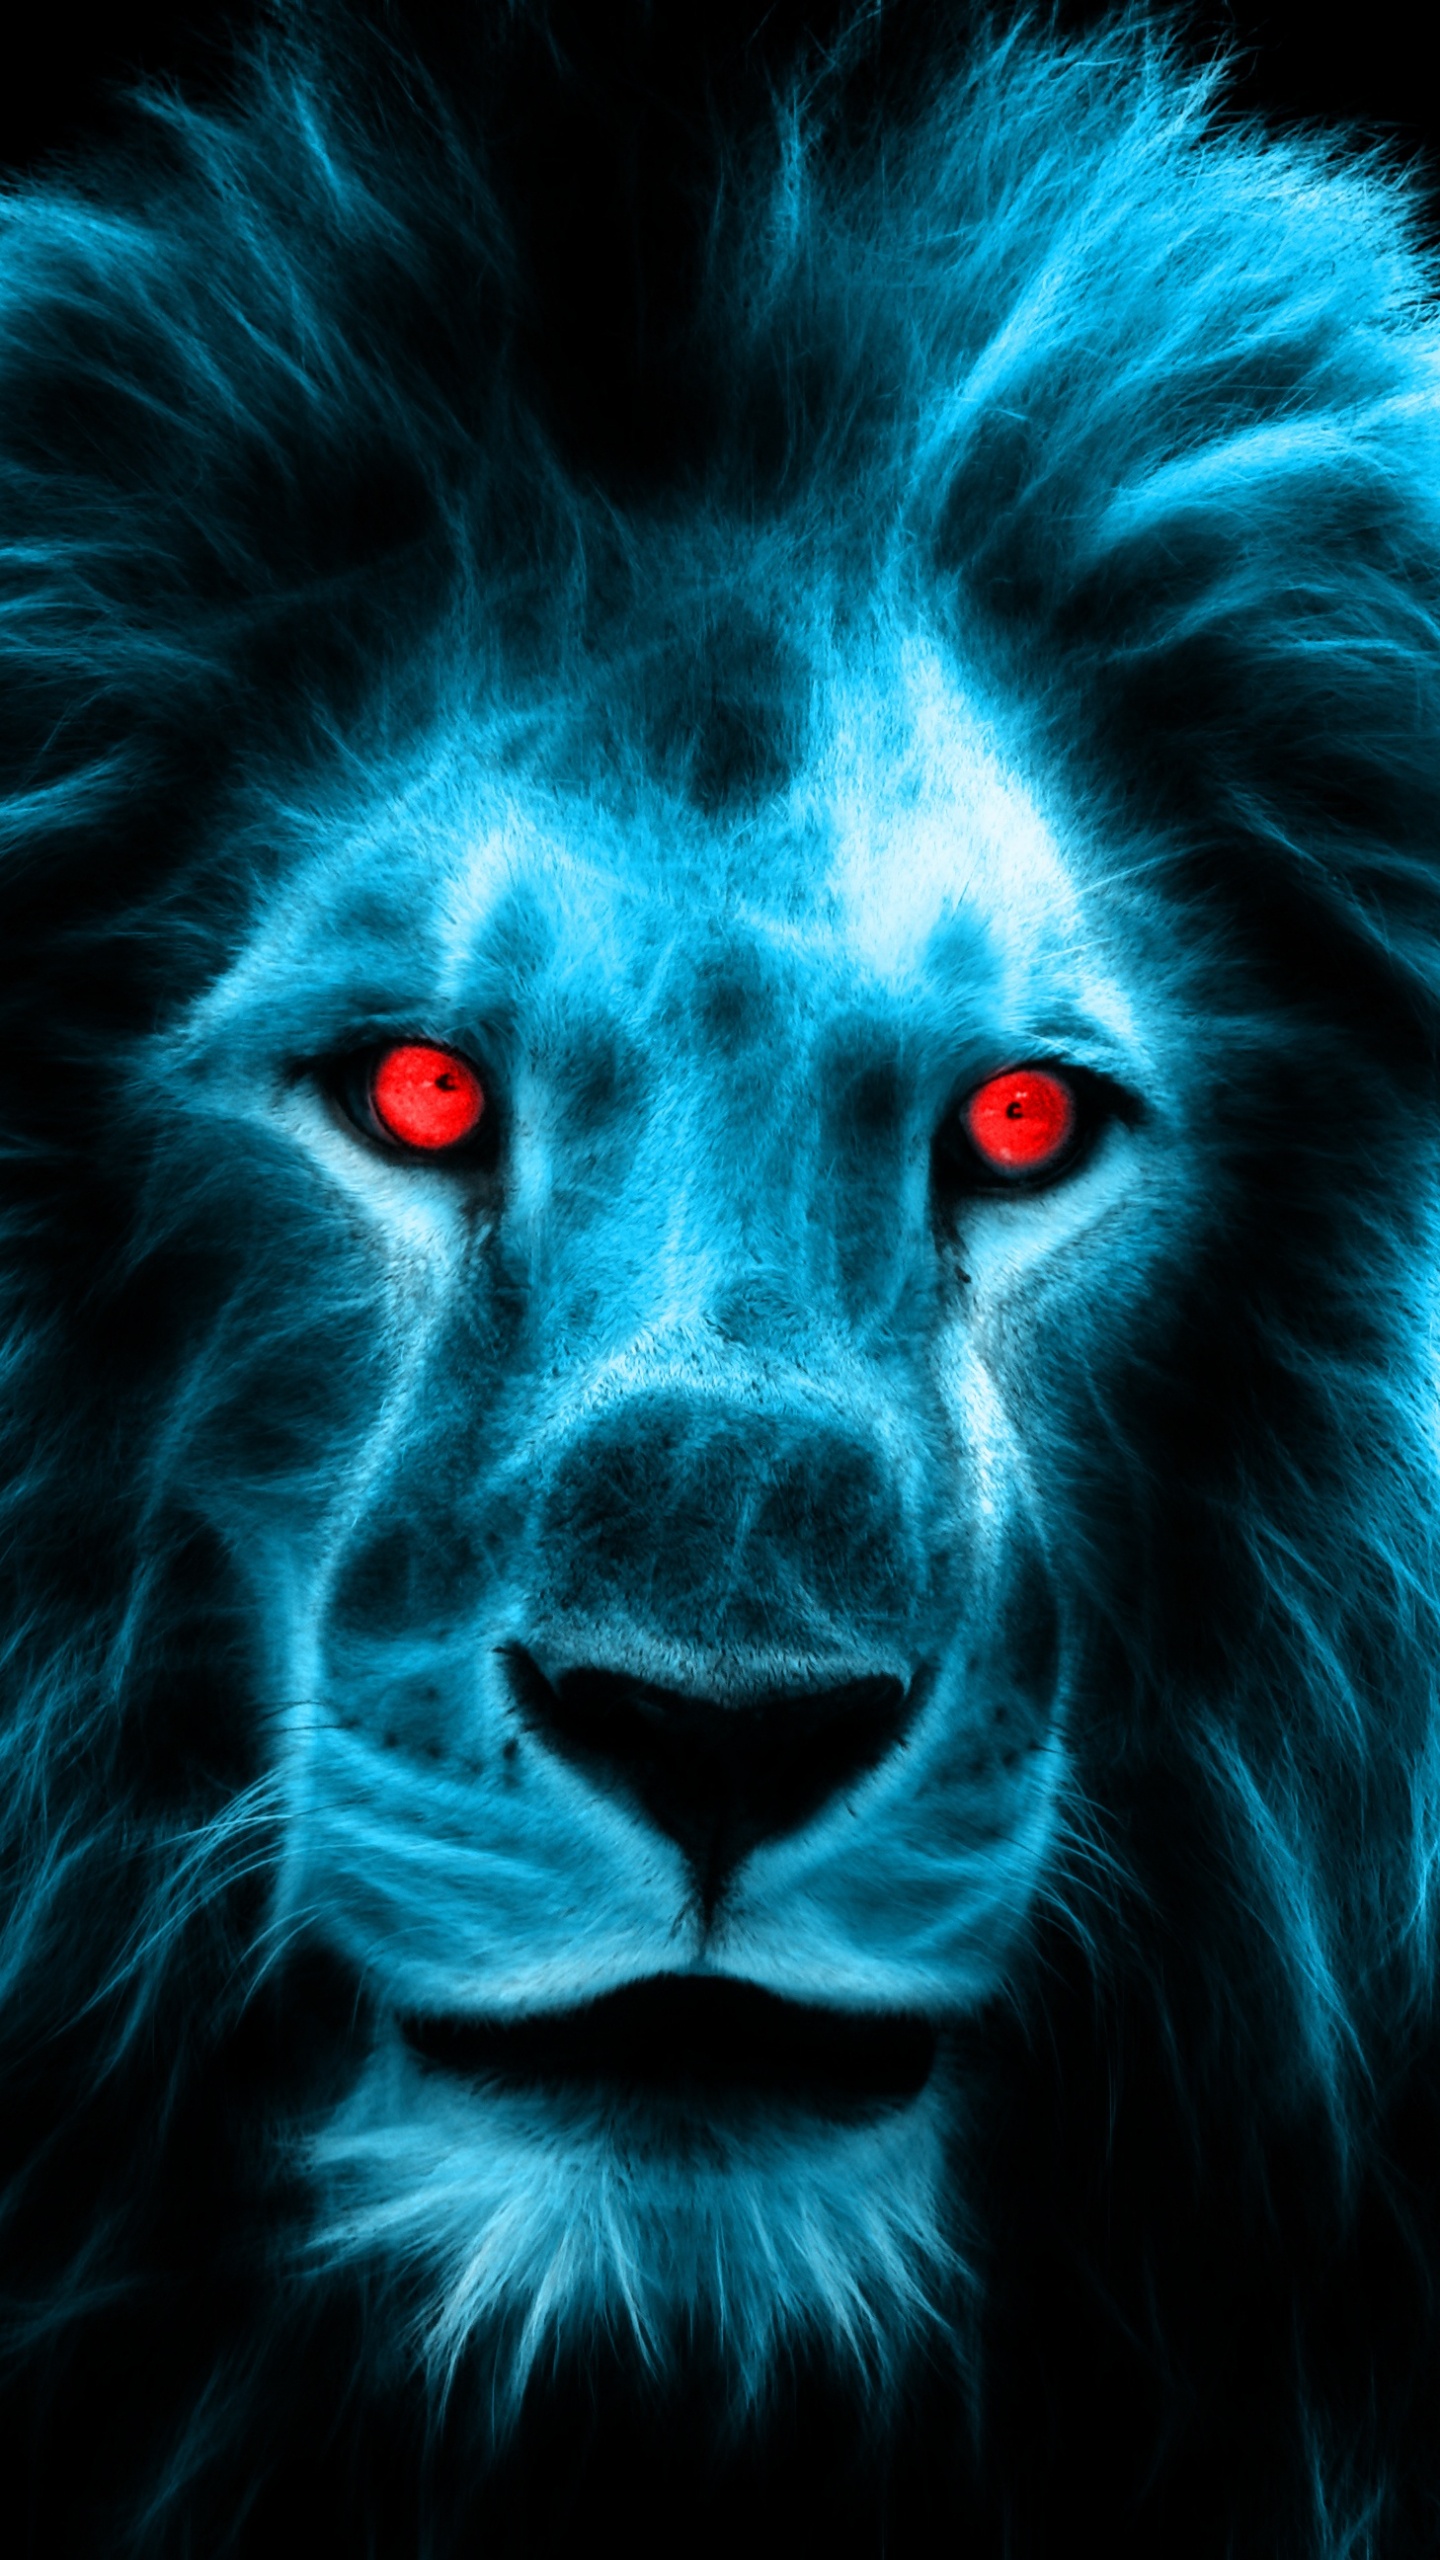 Lion With Blue Eyes Illustration. Wallpaper in 1440x2560 Resolution